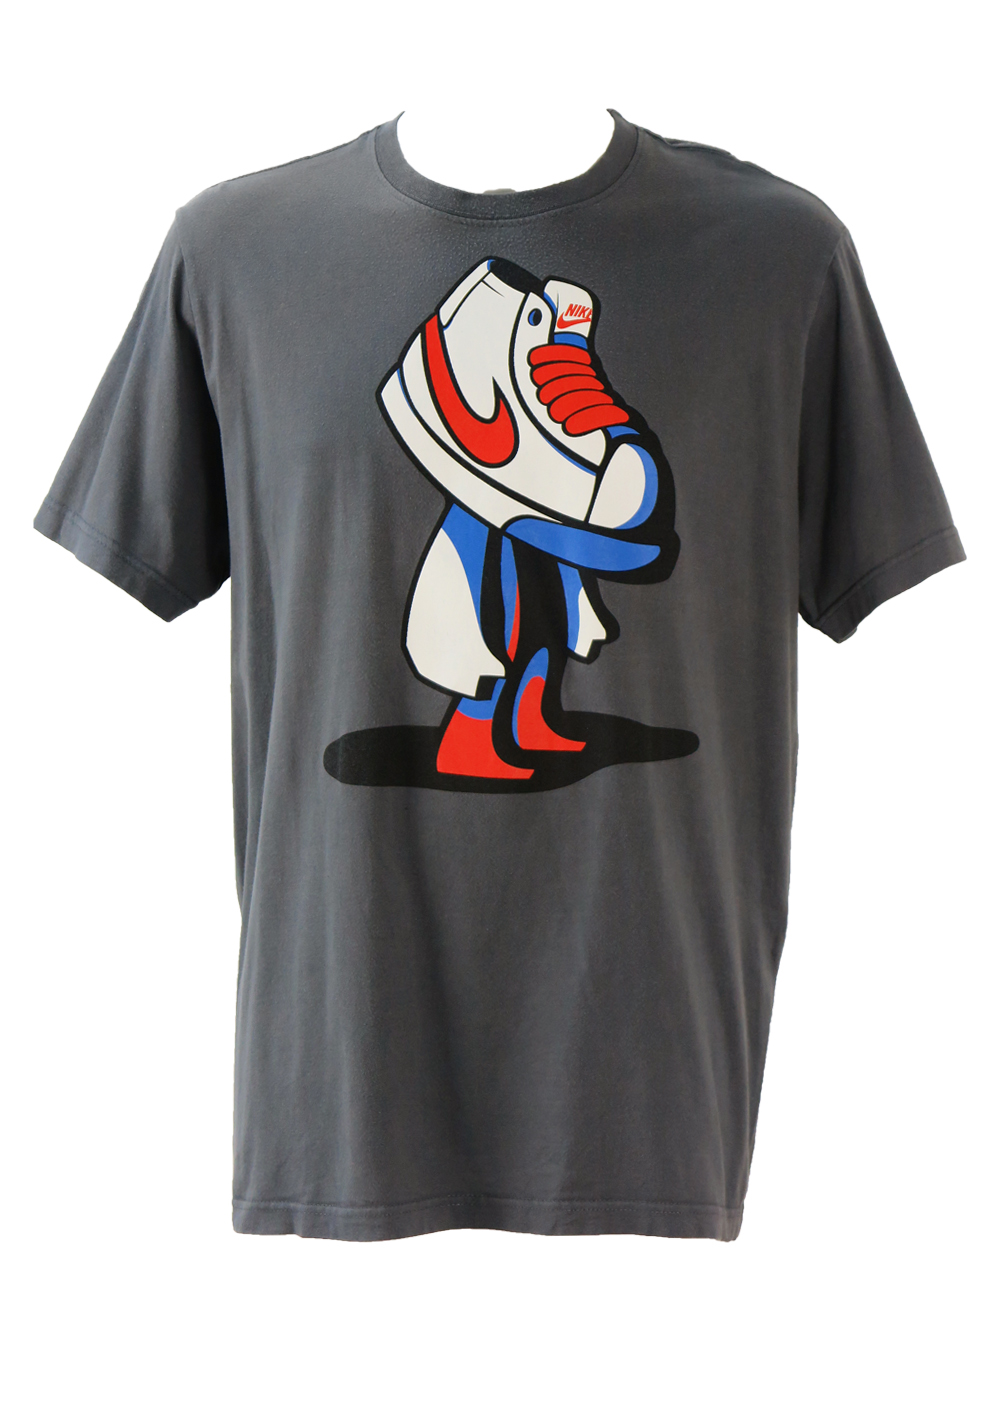 Grey Nike T-Shirt with Graphic Trainer Head Man Print! - L/XL | Reign ...